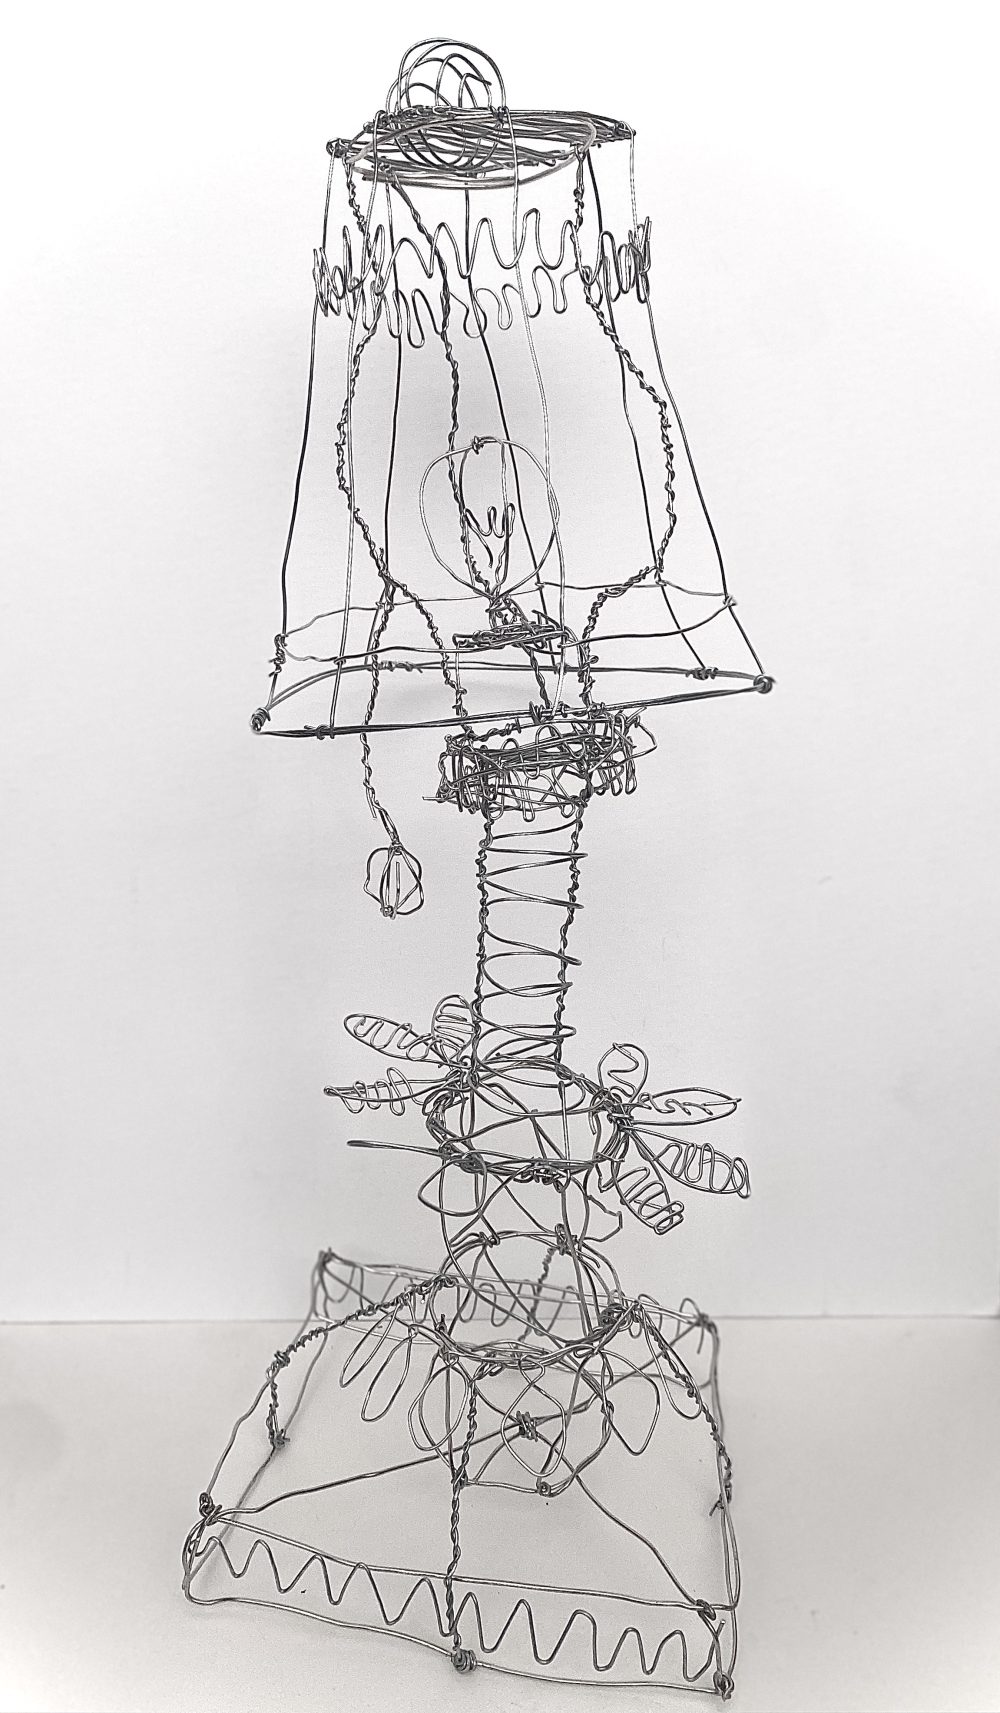 A wire sculpture of a lamp.